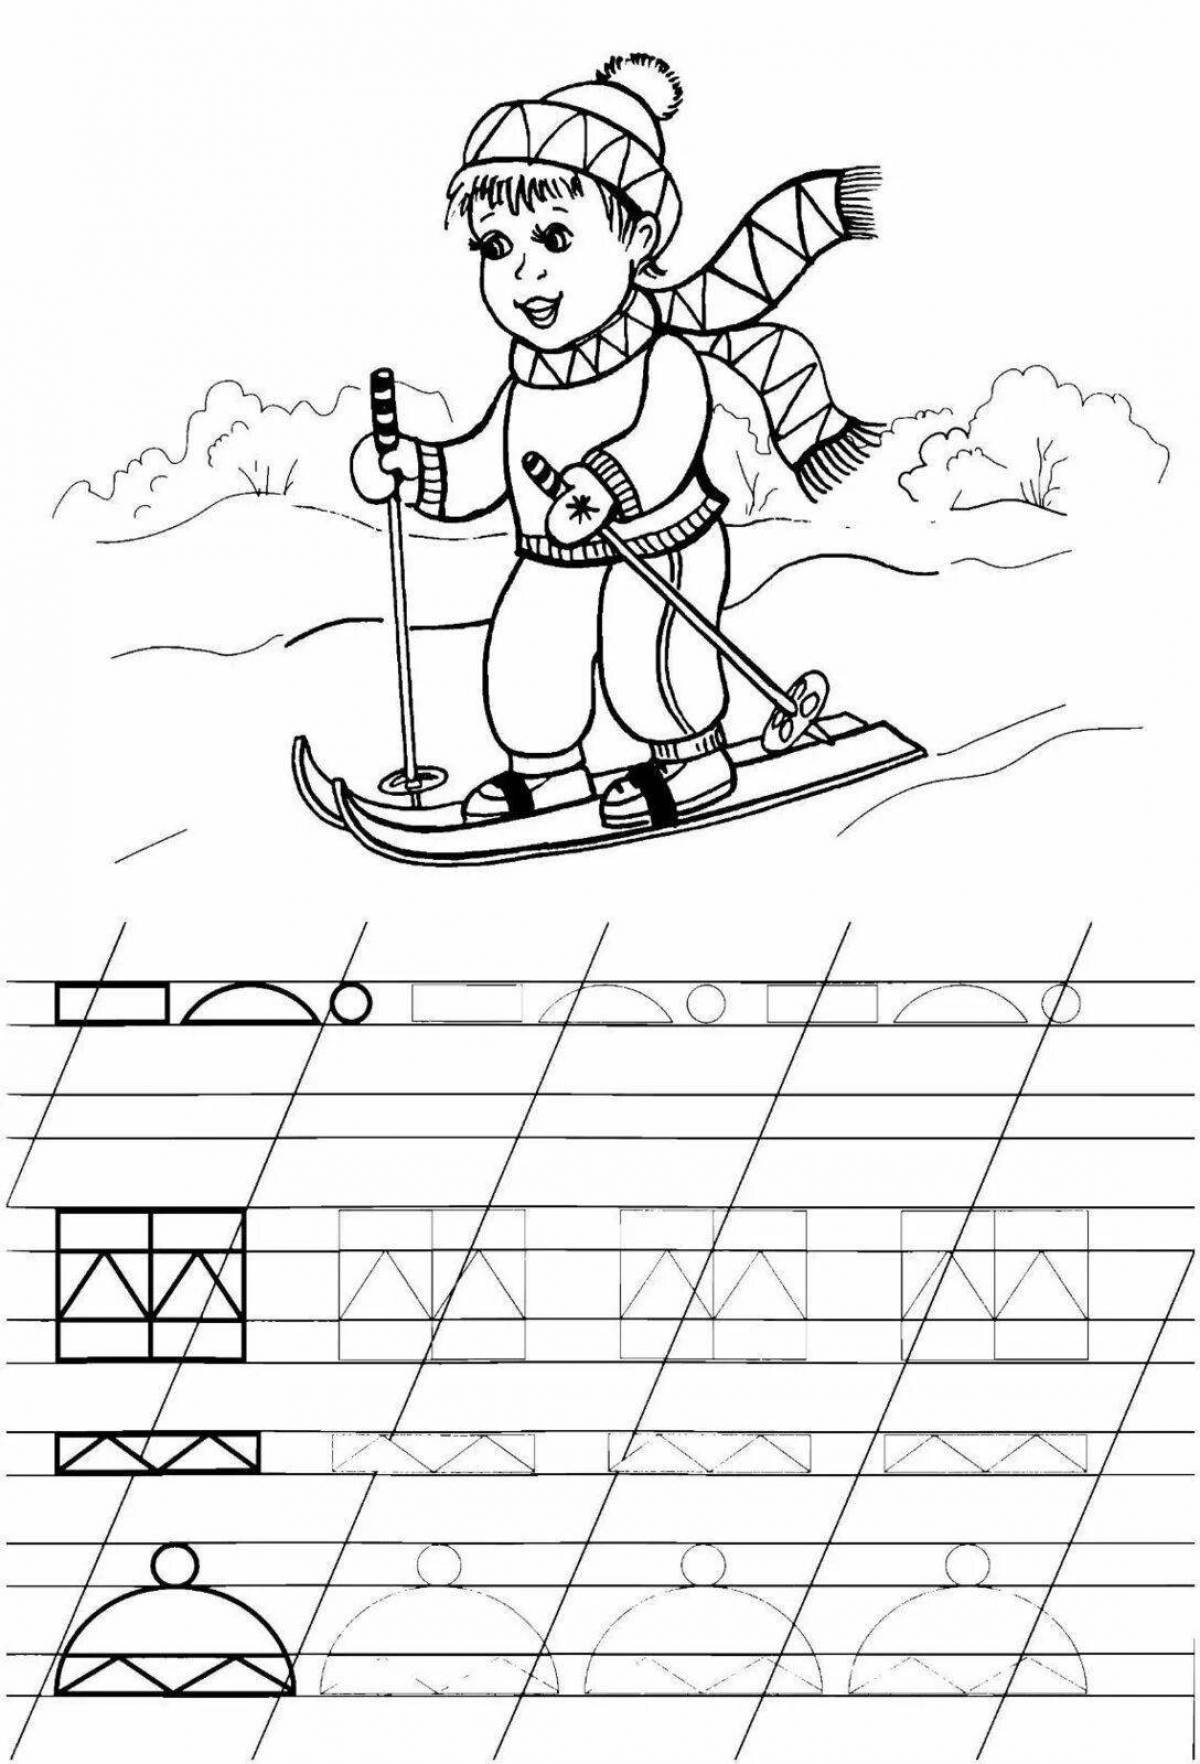 Coloring book sophisticated senior skier